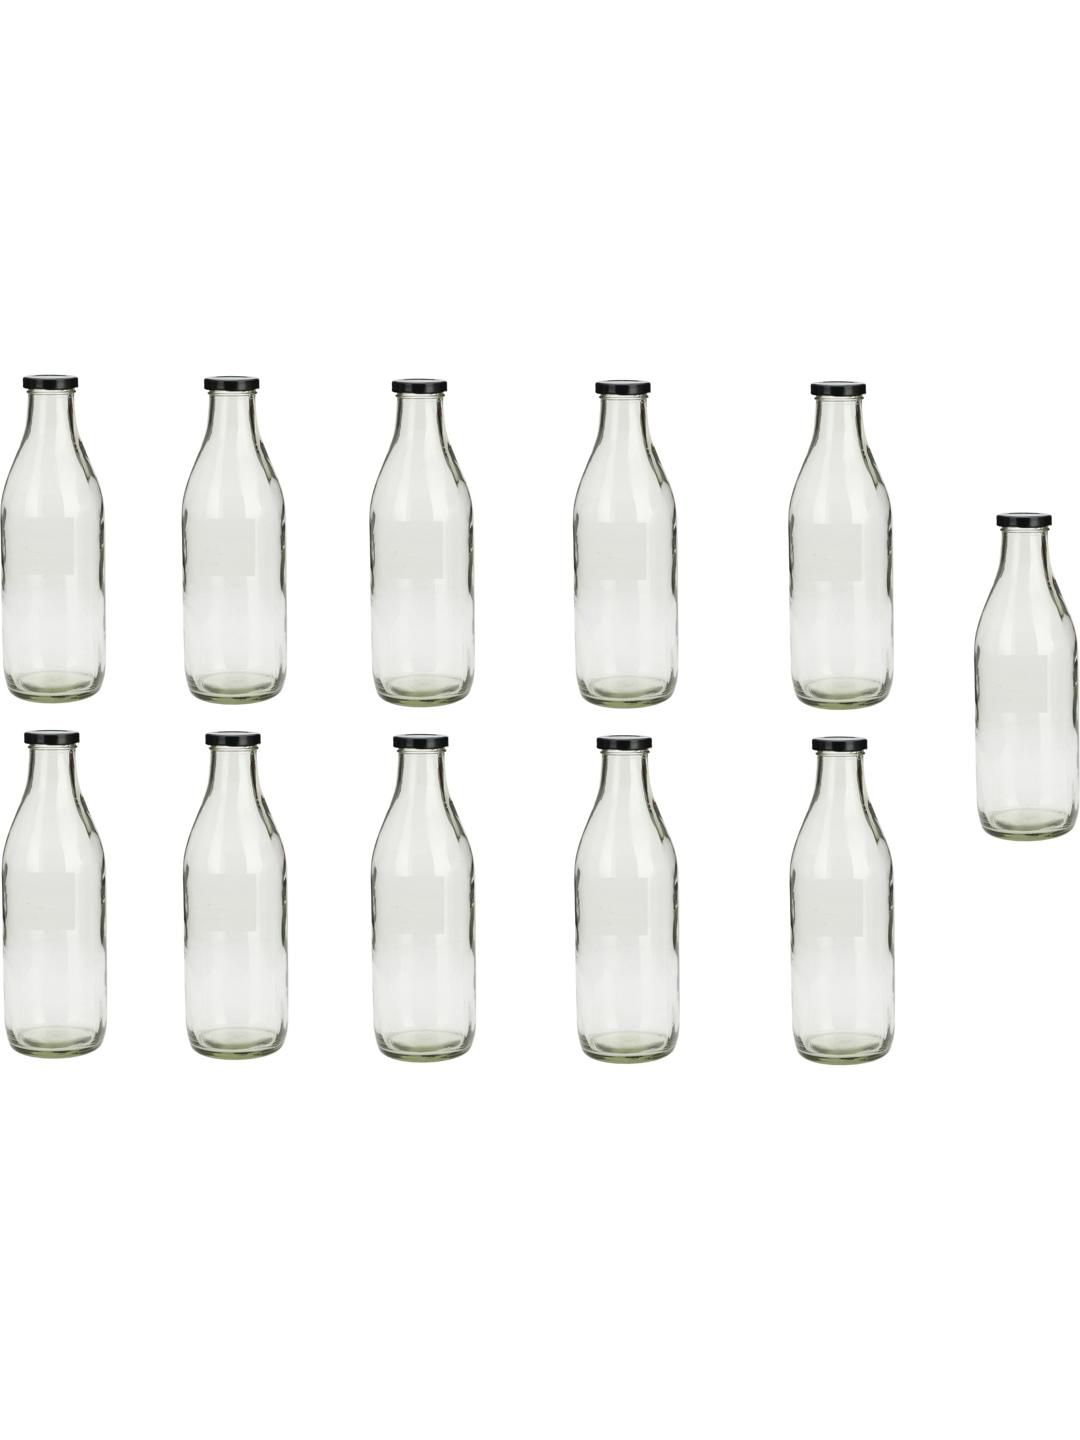     			AFAST Multipurpose Bottle Glass Transparent Utility Container ( Set of 11 )